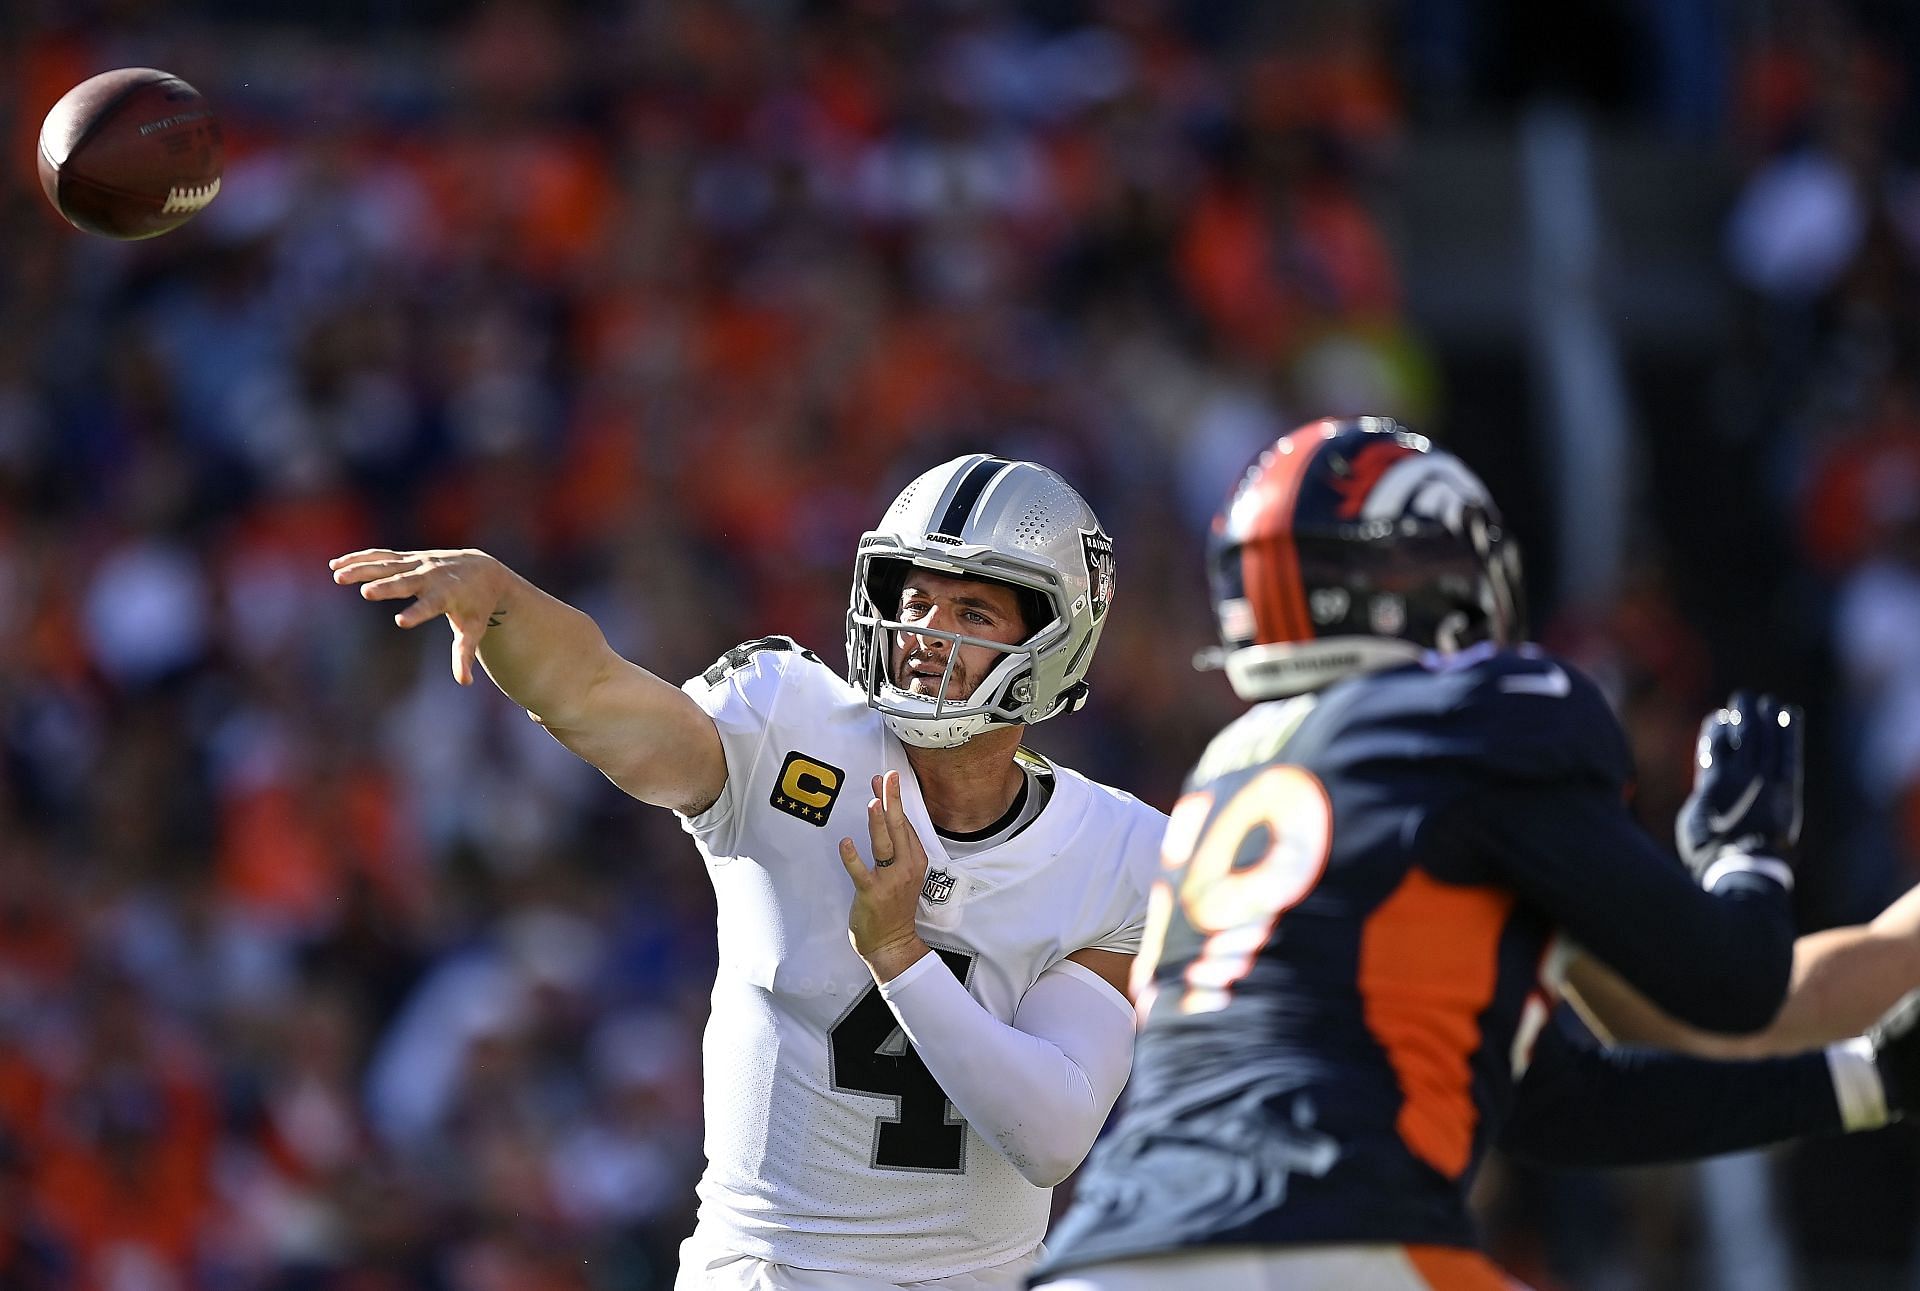 Broncos vs. Raiders: How to watch, game time, TV schedule